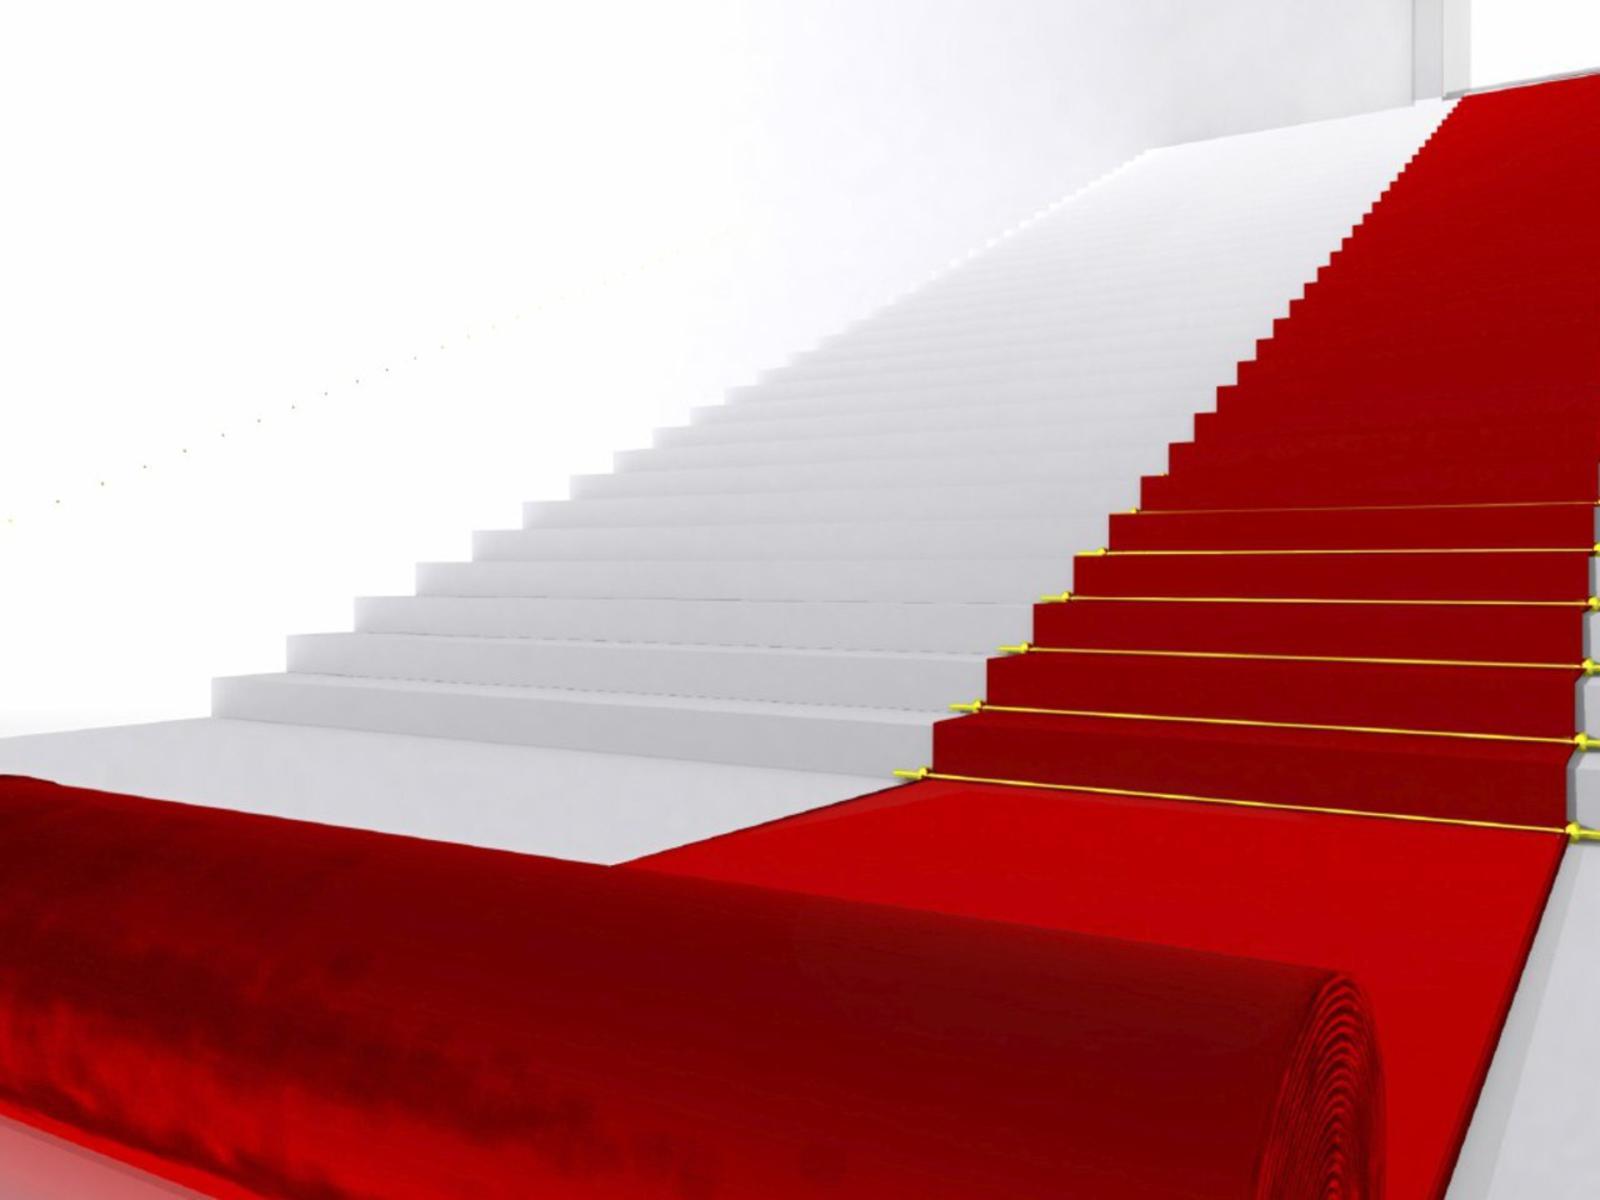 Red Carpet Wallpapers